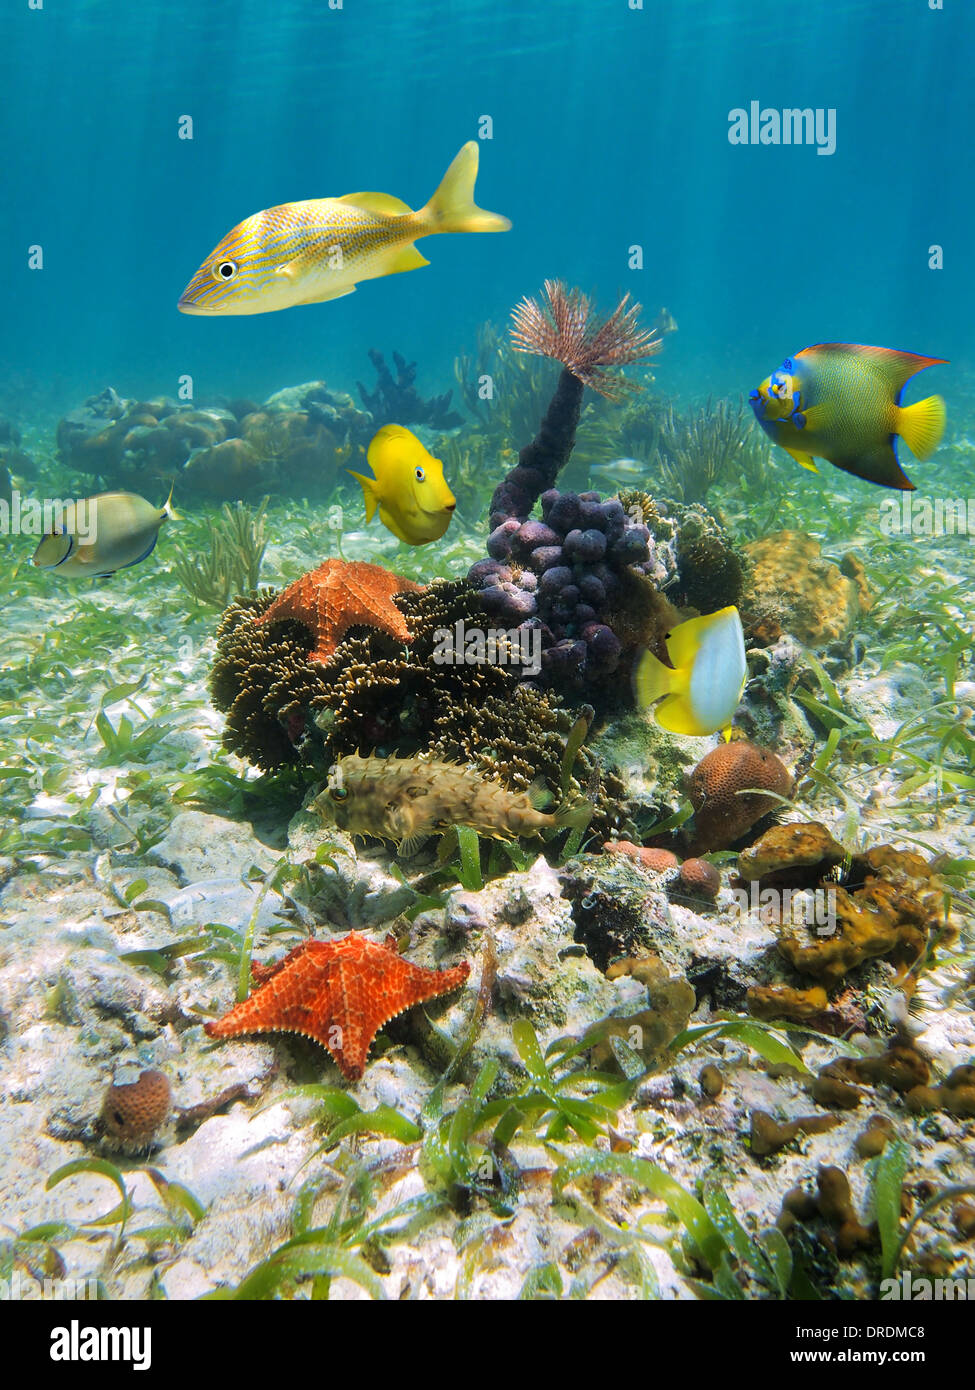 Underwater marine life with colorful starfish, fish, coral, sponge and feather duster worm, Caribbean sea, Costa Rica Stock Photo